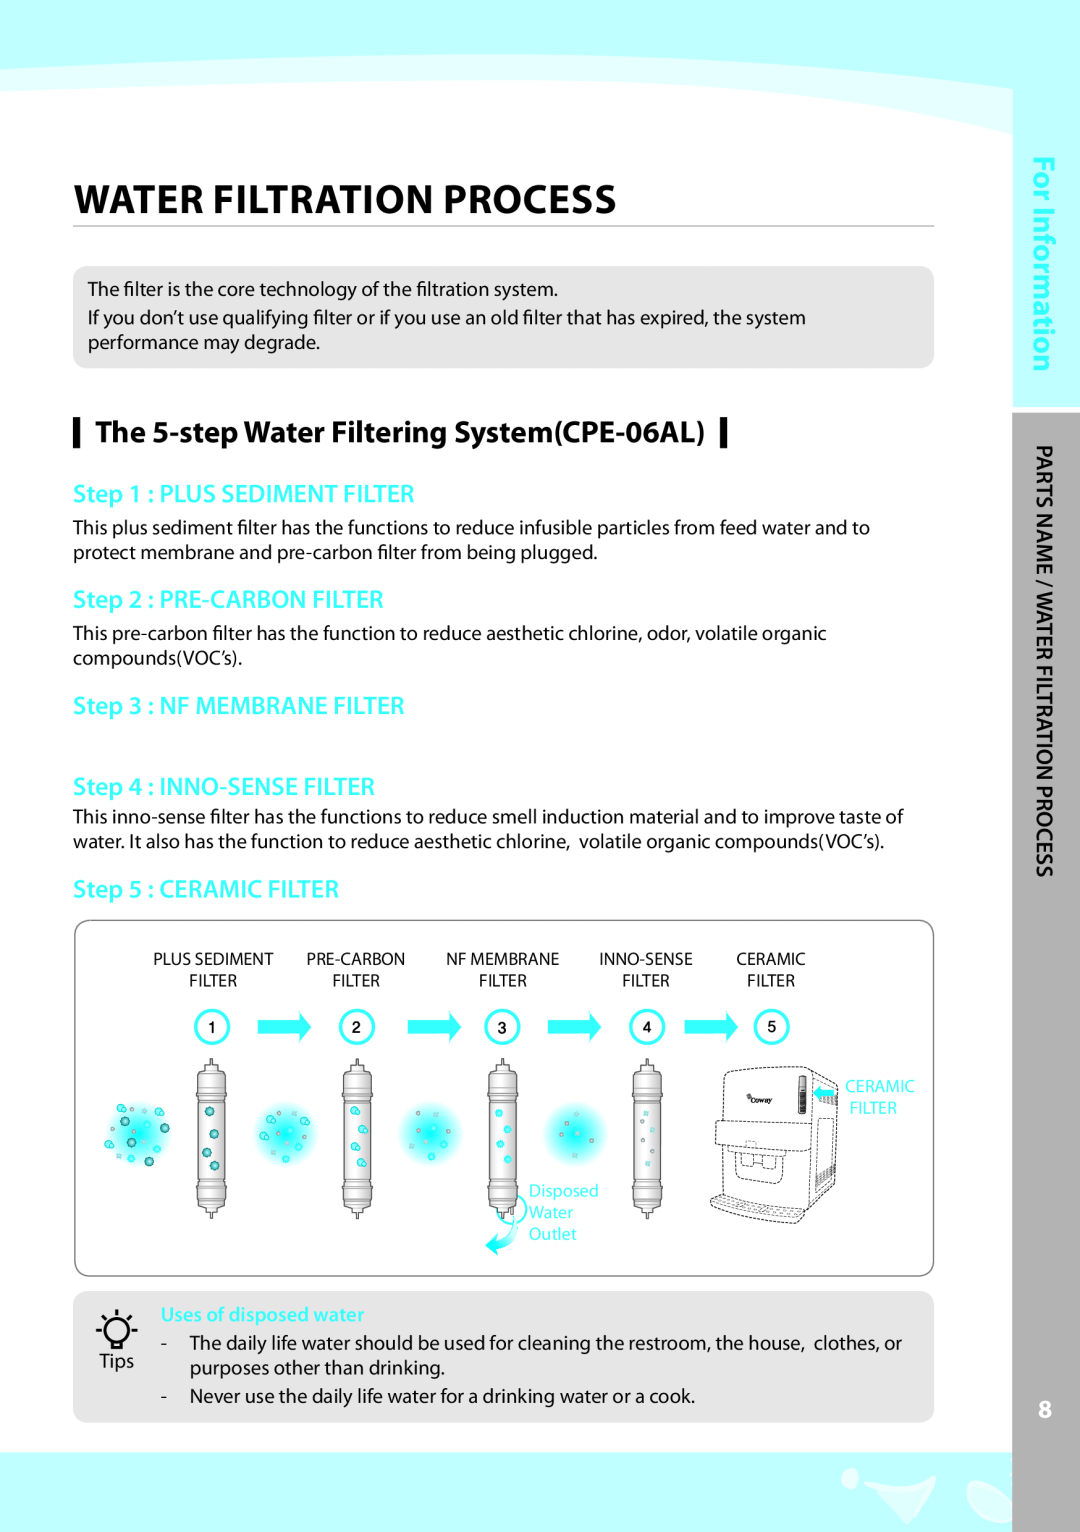 Coway Water filtration process, The 5-step Water Filtering SystemCPE-06AL, Plus Sediment Filter, Pre-Carbon Filter 